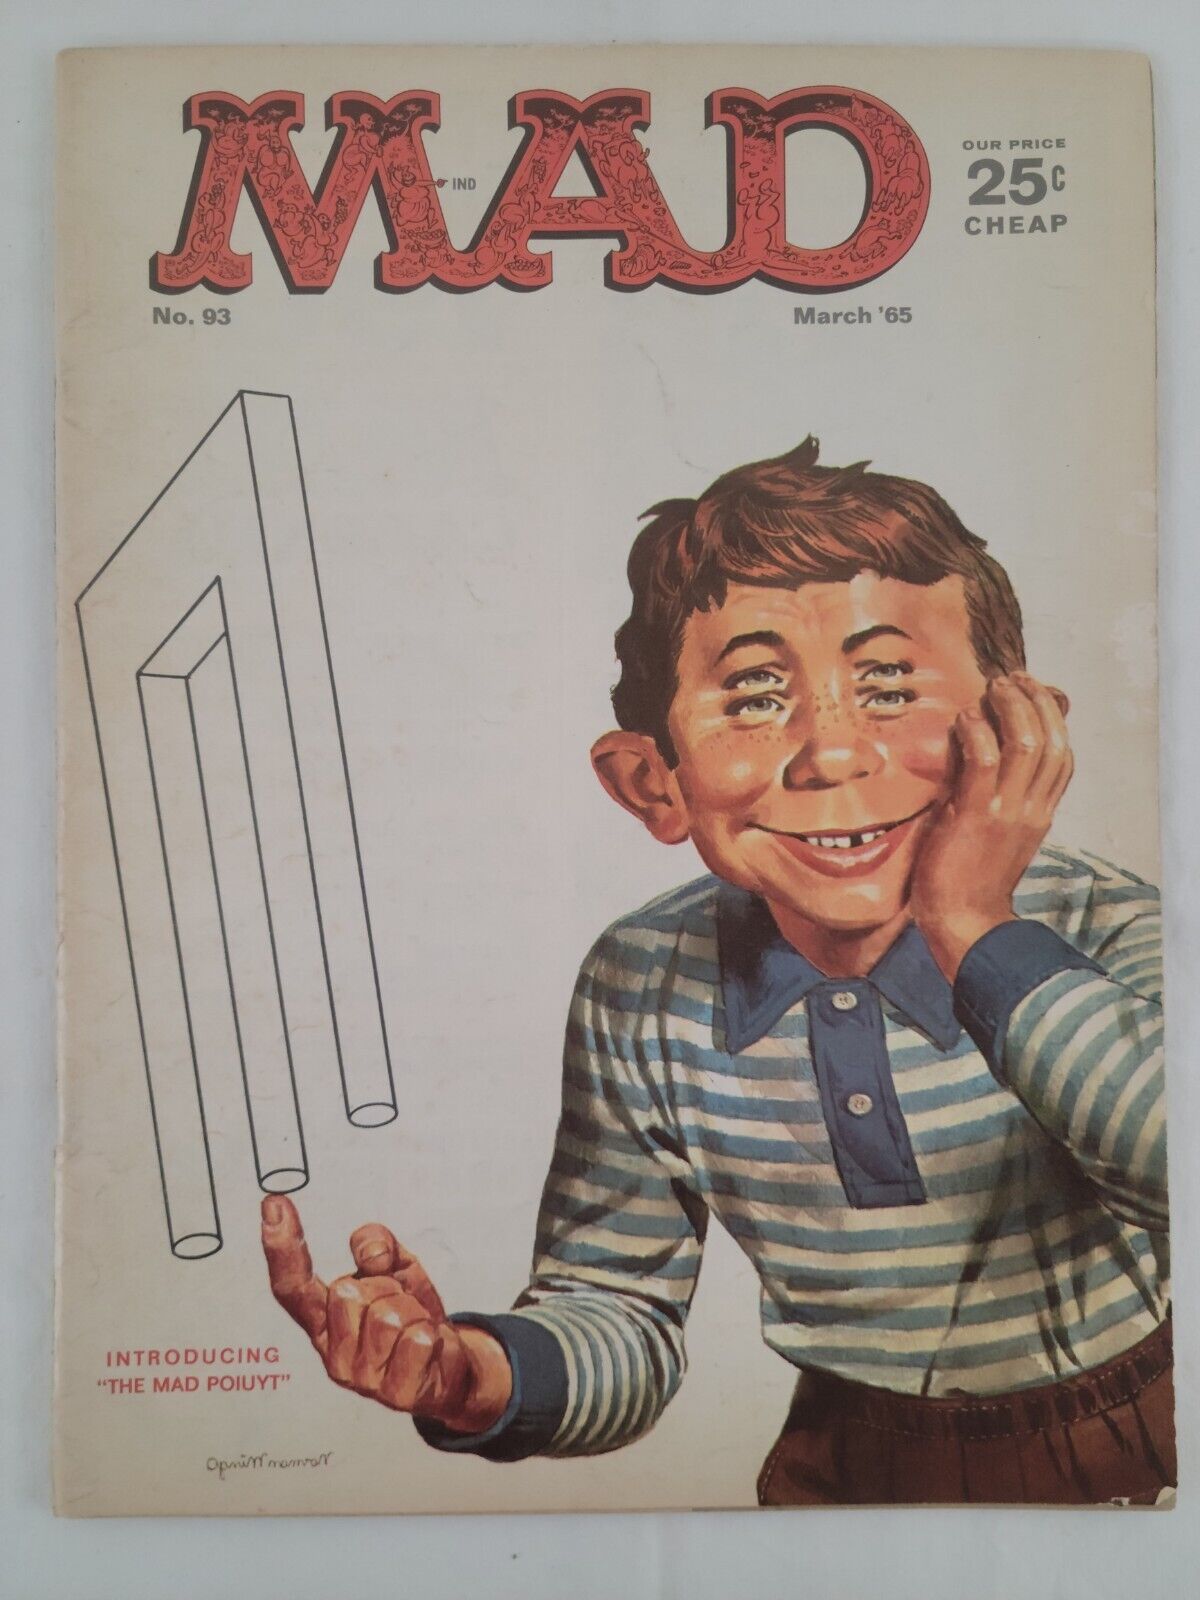 MAD Magazine #93 March 1965 Introducing The Mad Poiuyt Excellent Copy Neuman